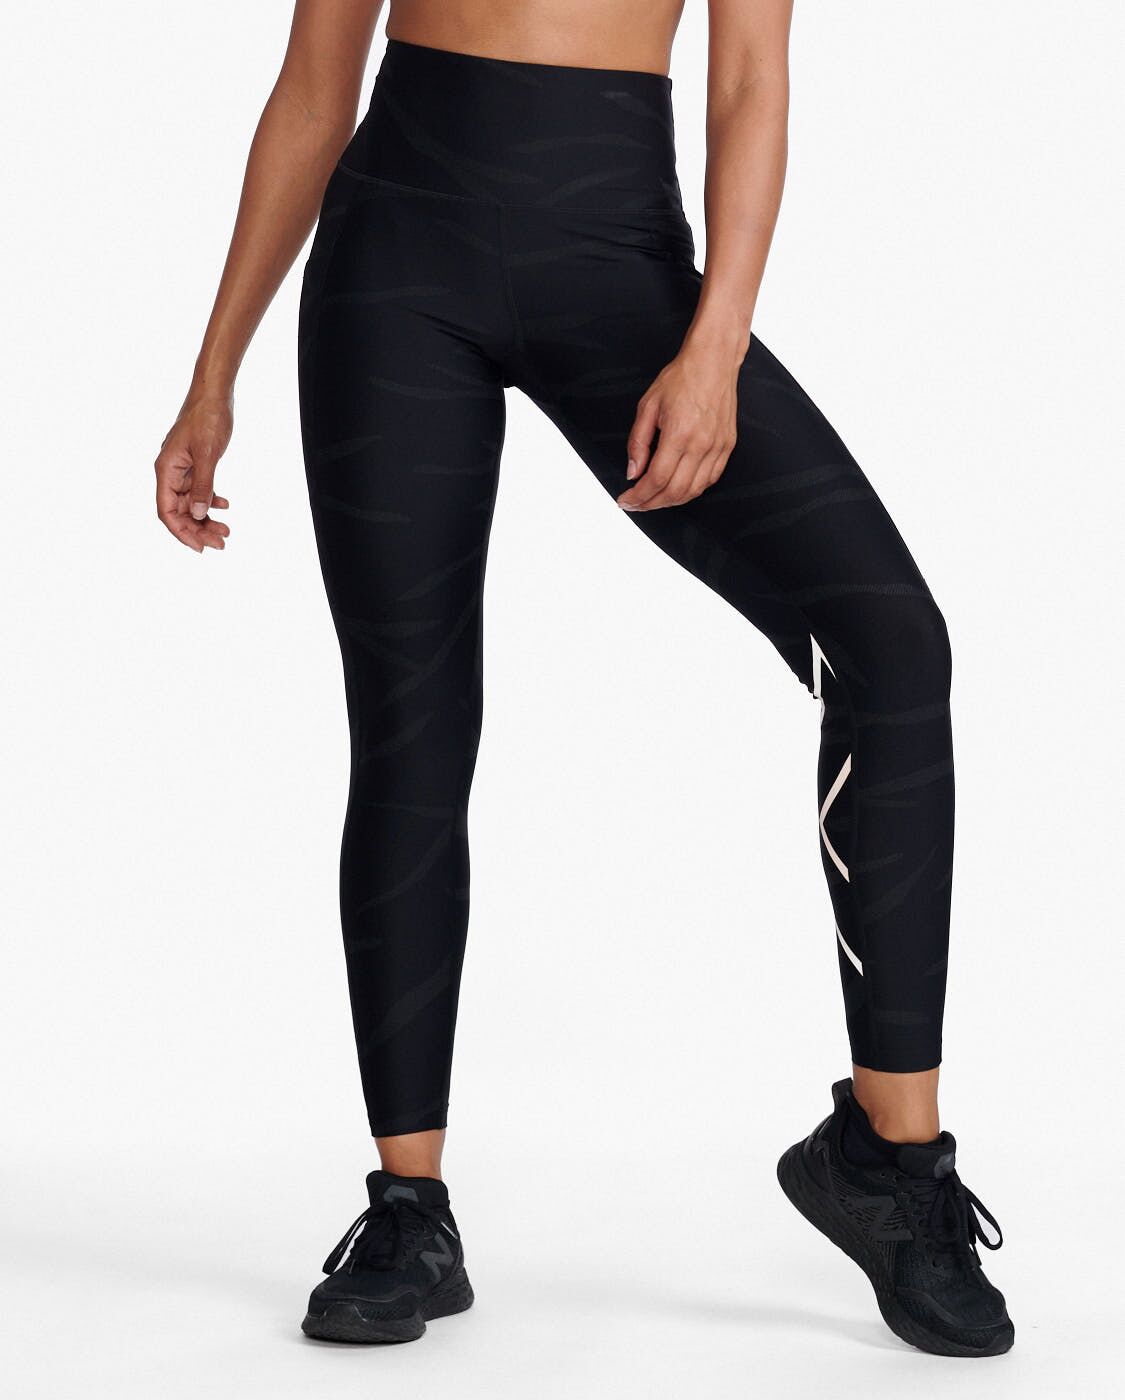 2XU South Africa - Womens Aero Reflect Hi-Rise Compression Tights - Soft Focus/Peach Whip Reflective